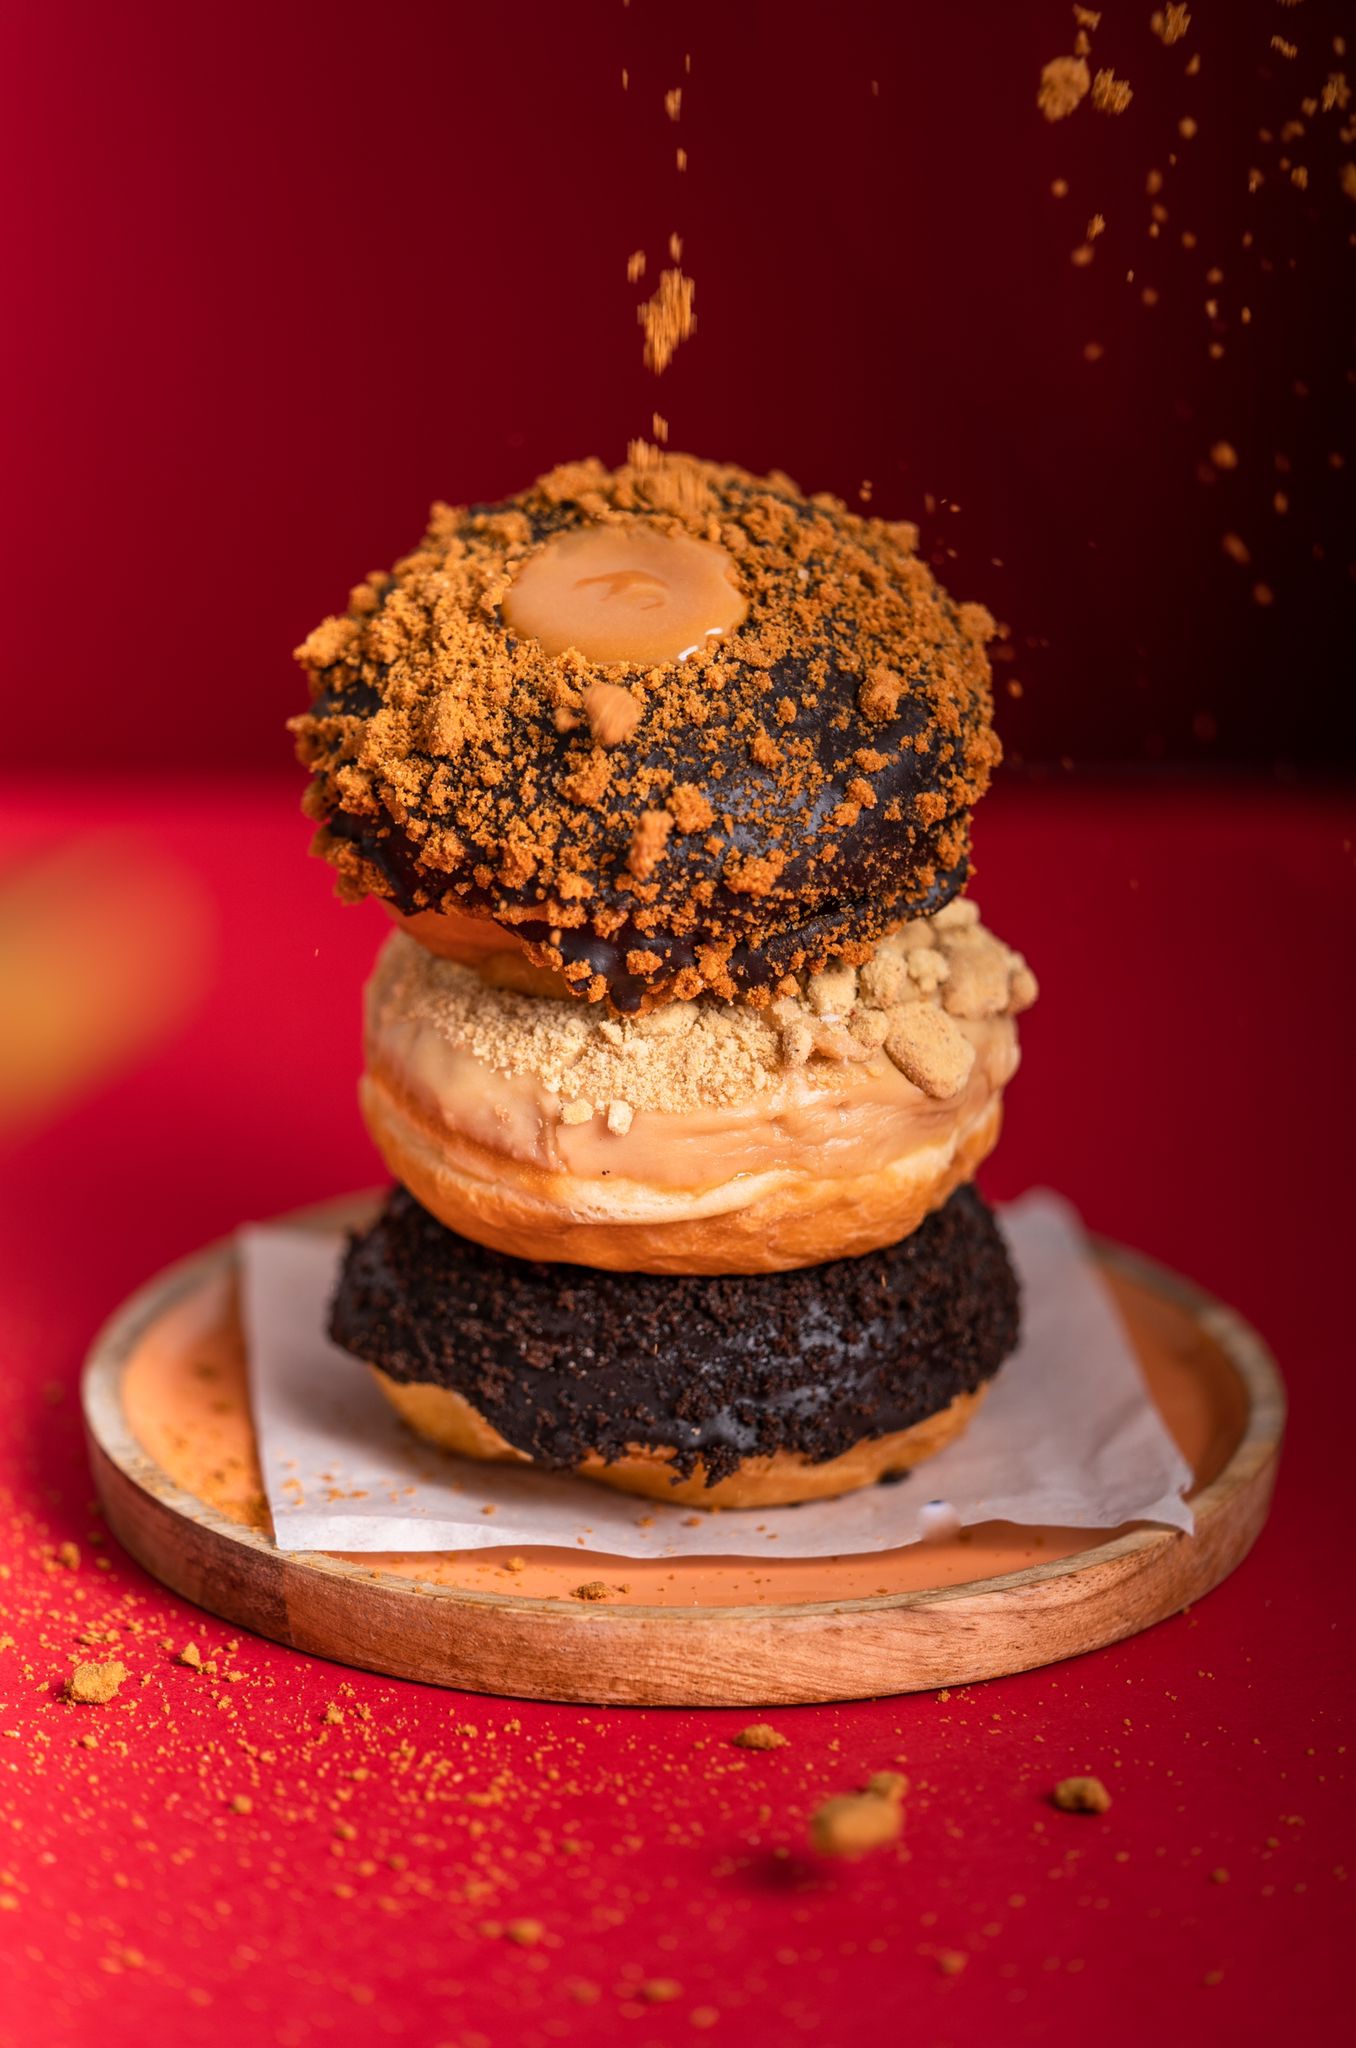 An assortment of three doughnuts sprinkled with caramel and chocolate on a red table 